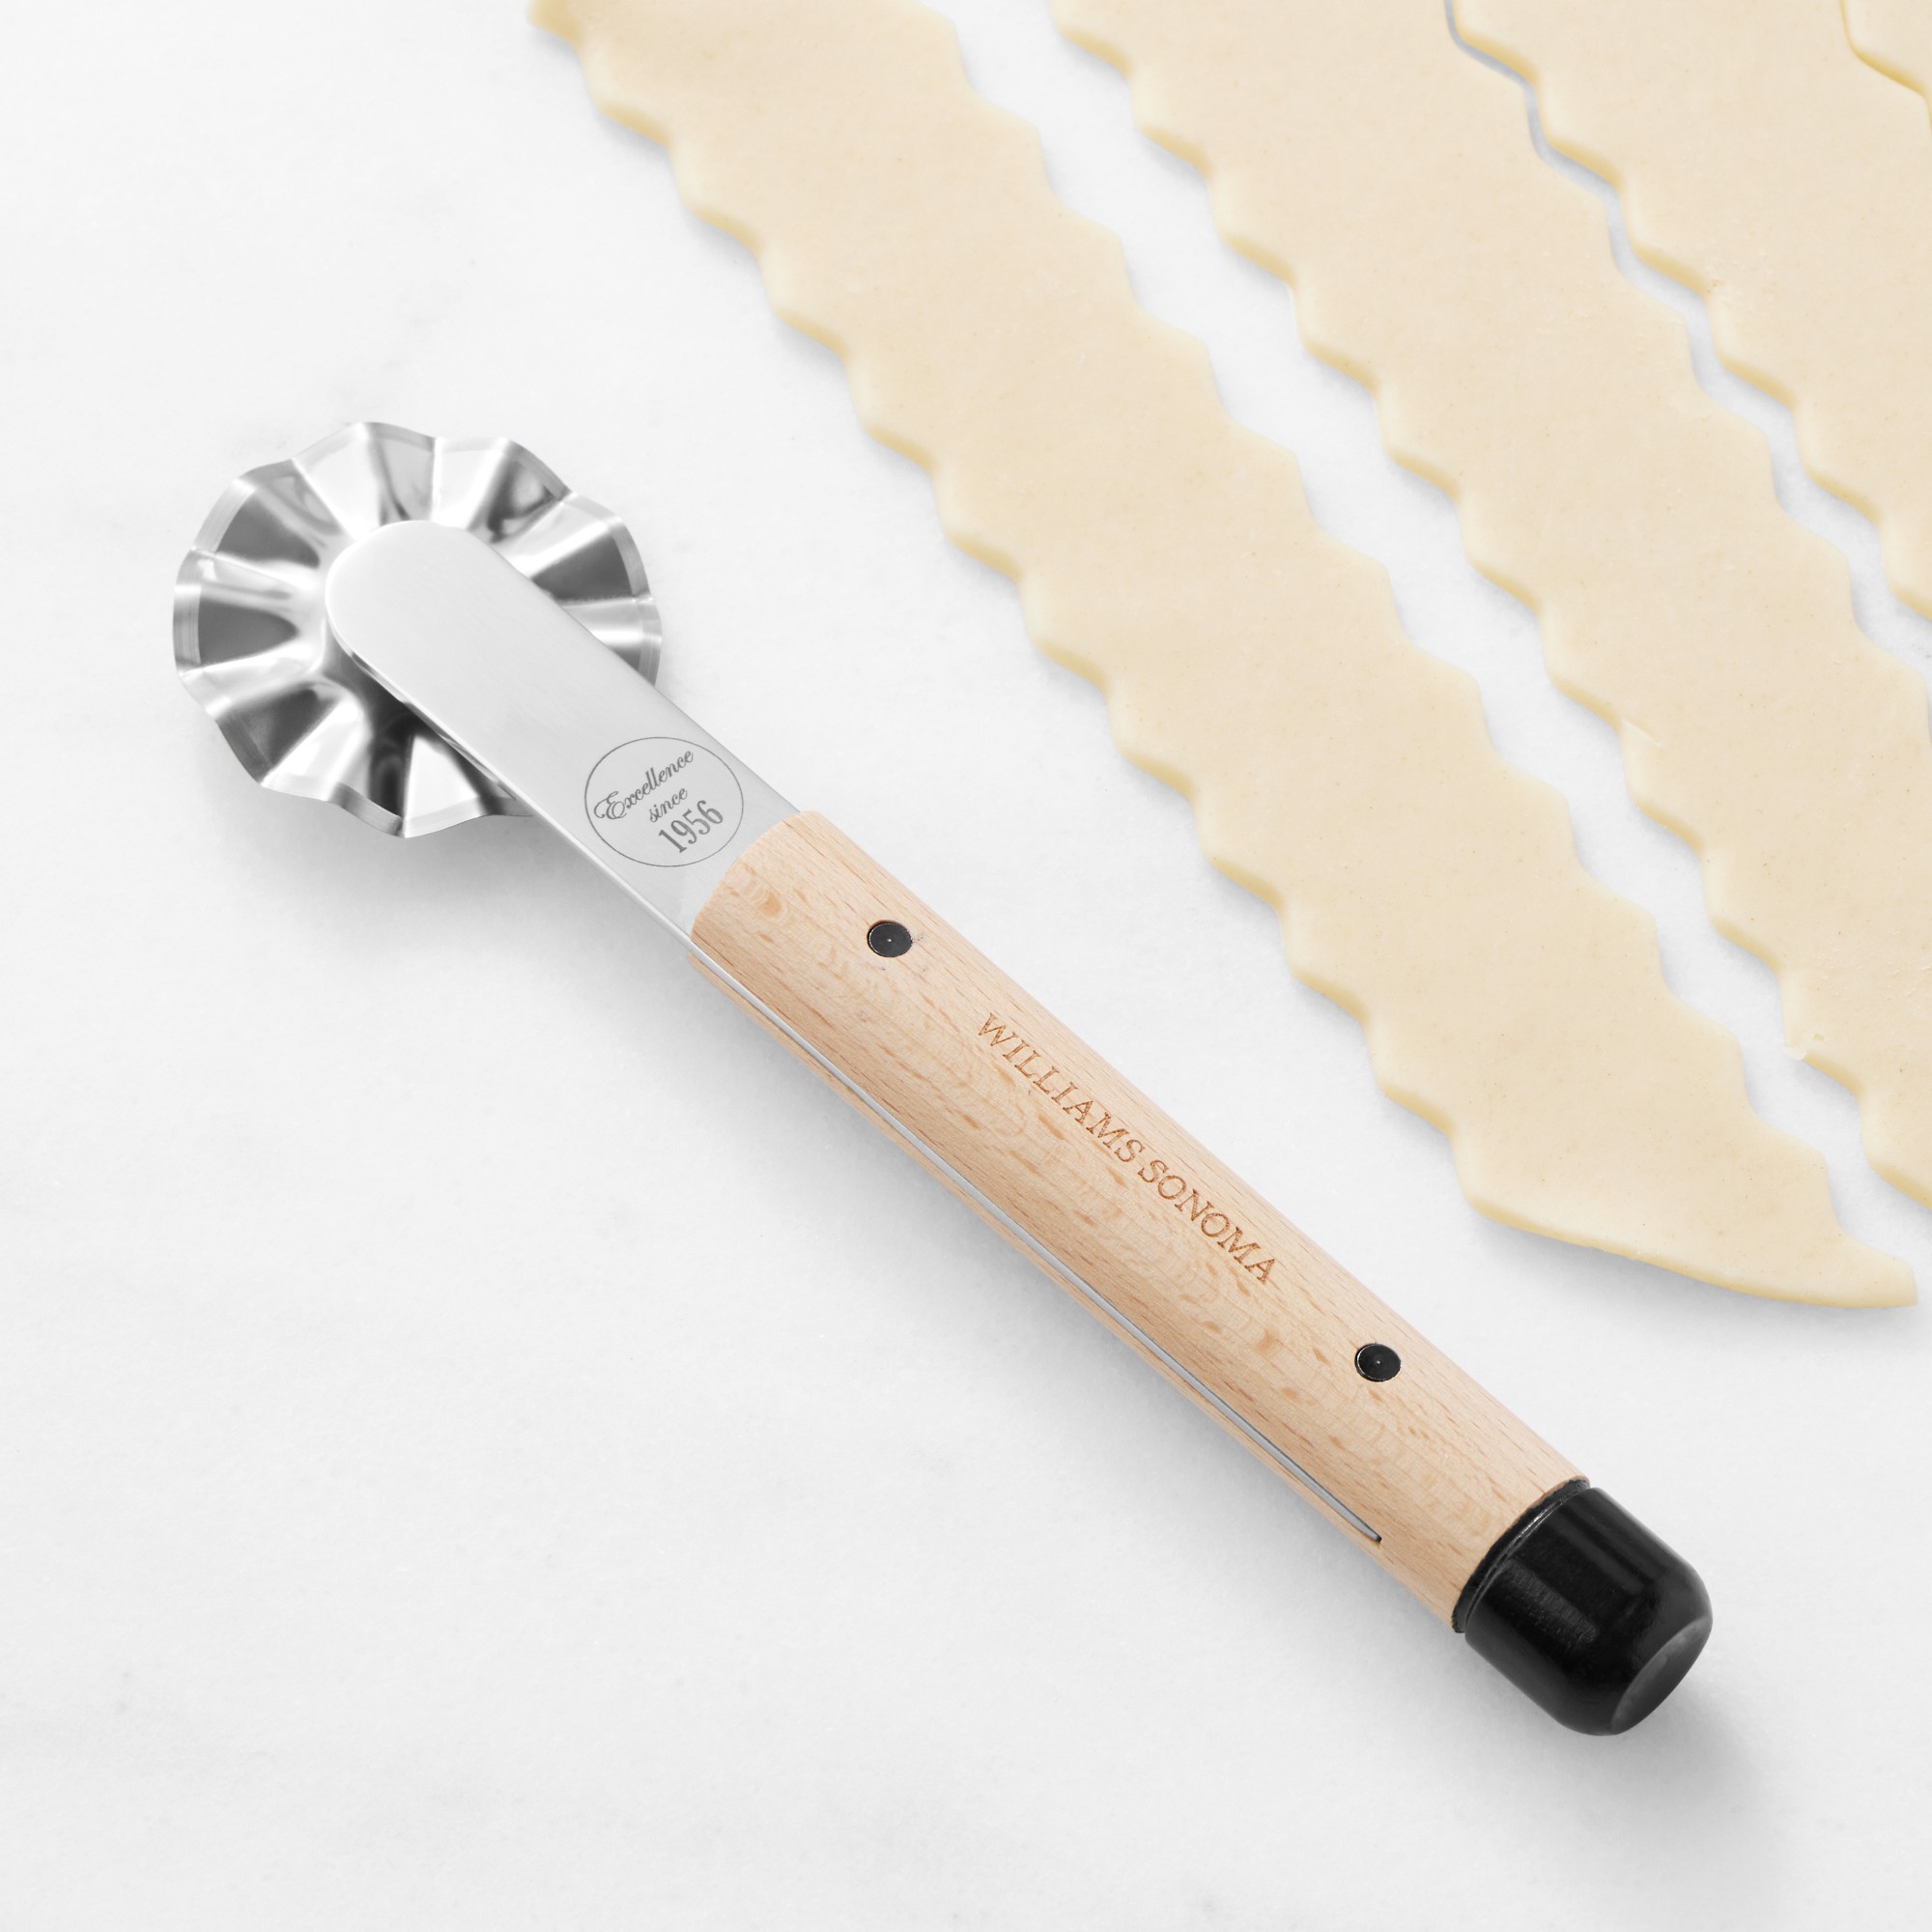 Williams Sonoma Classic Fluted Pastry Cutter